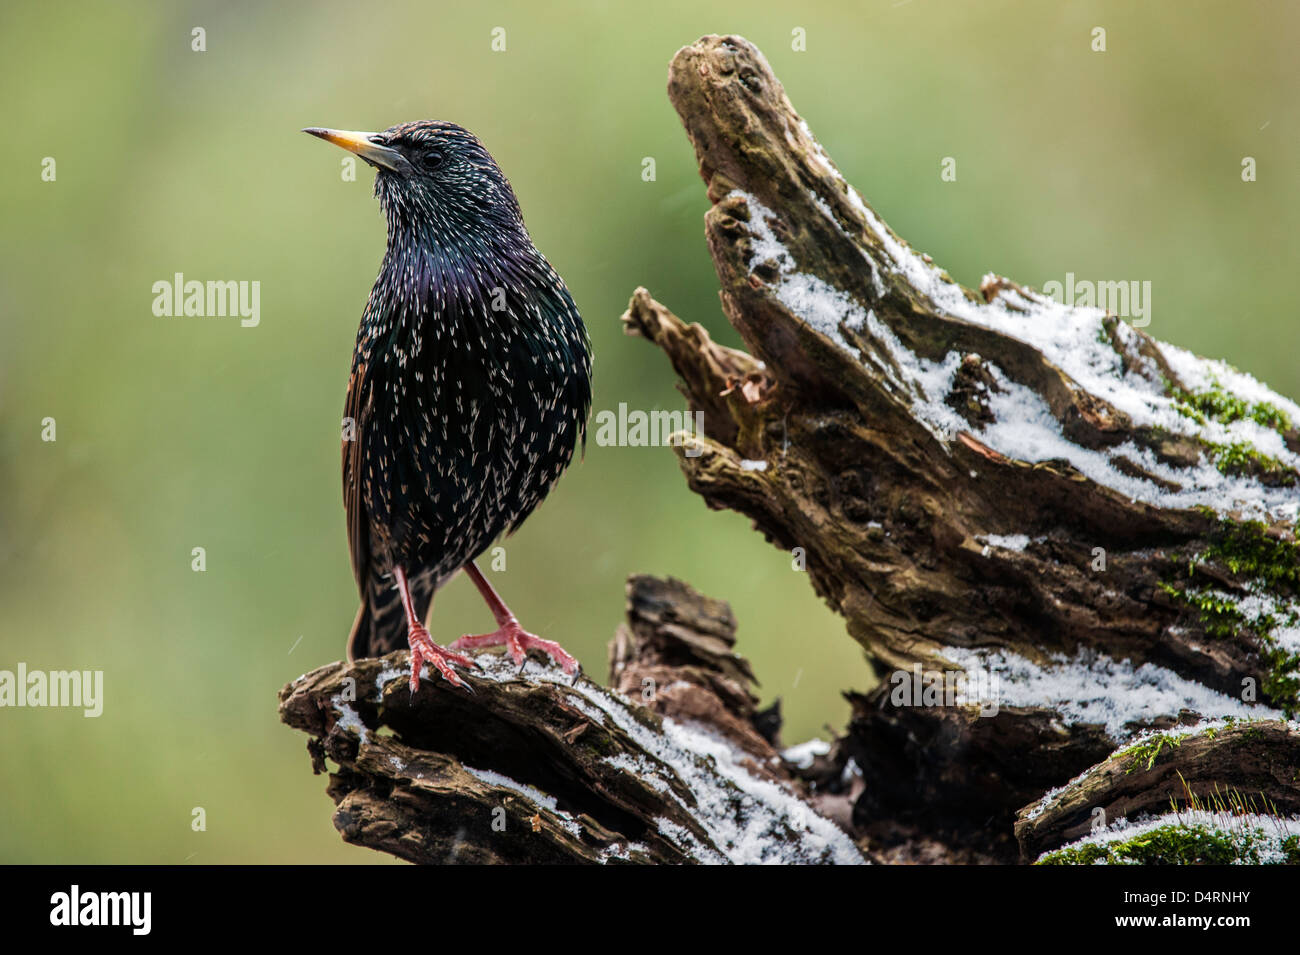 Common Starling / European starling (Sturnus vulgaris) perched on tree stump in the snow in winter Stock Photo